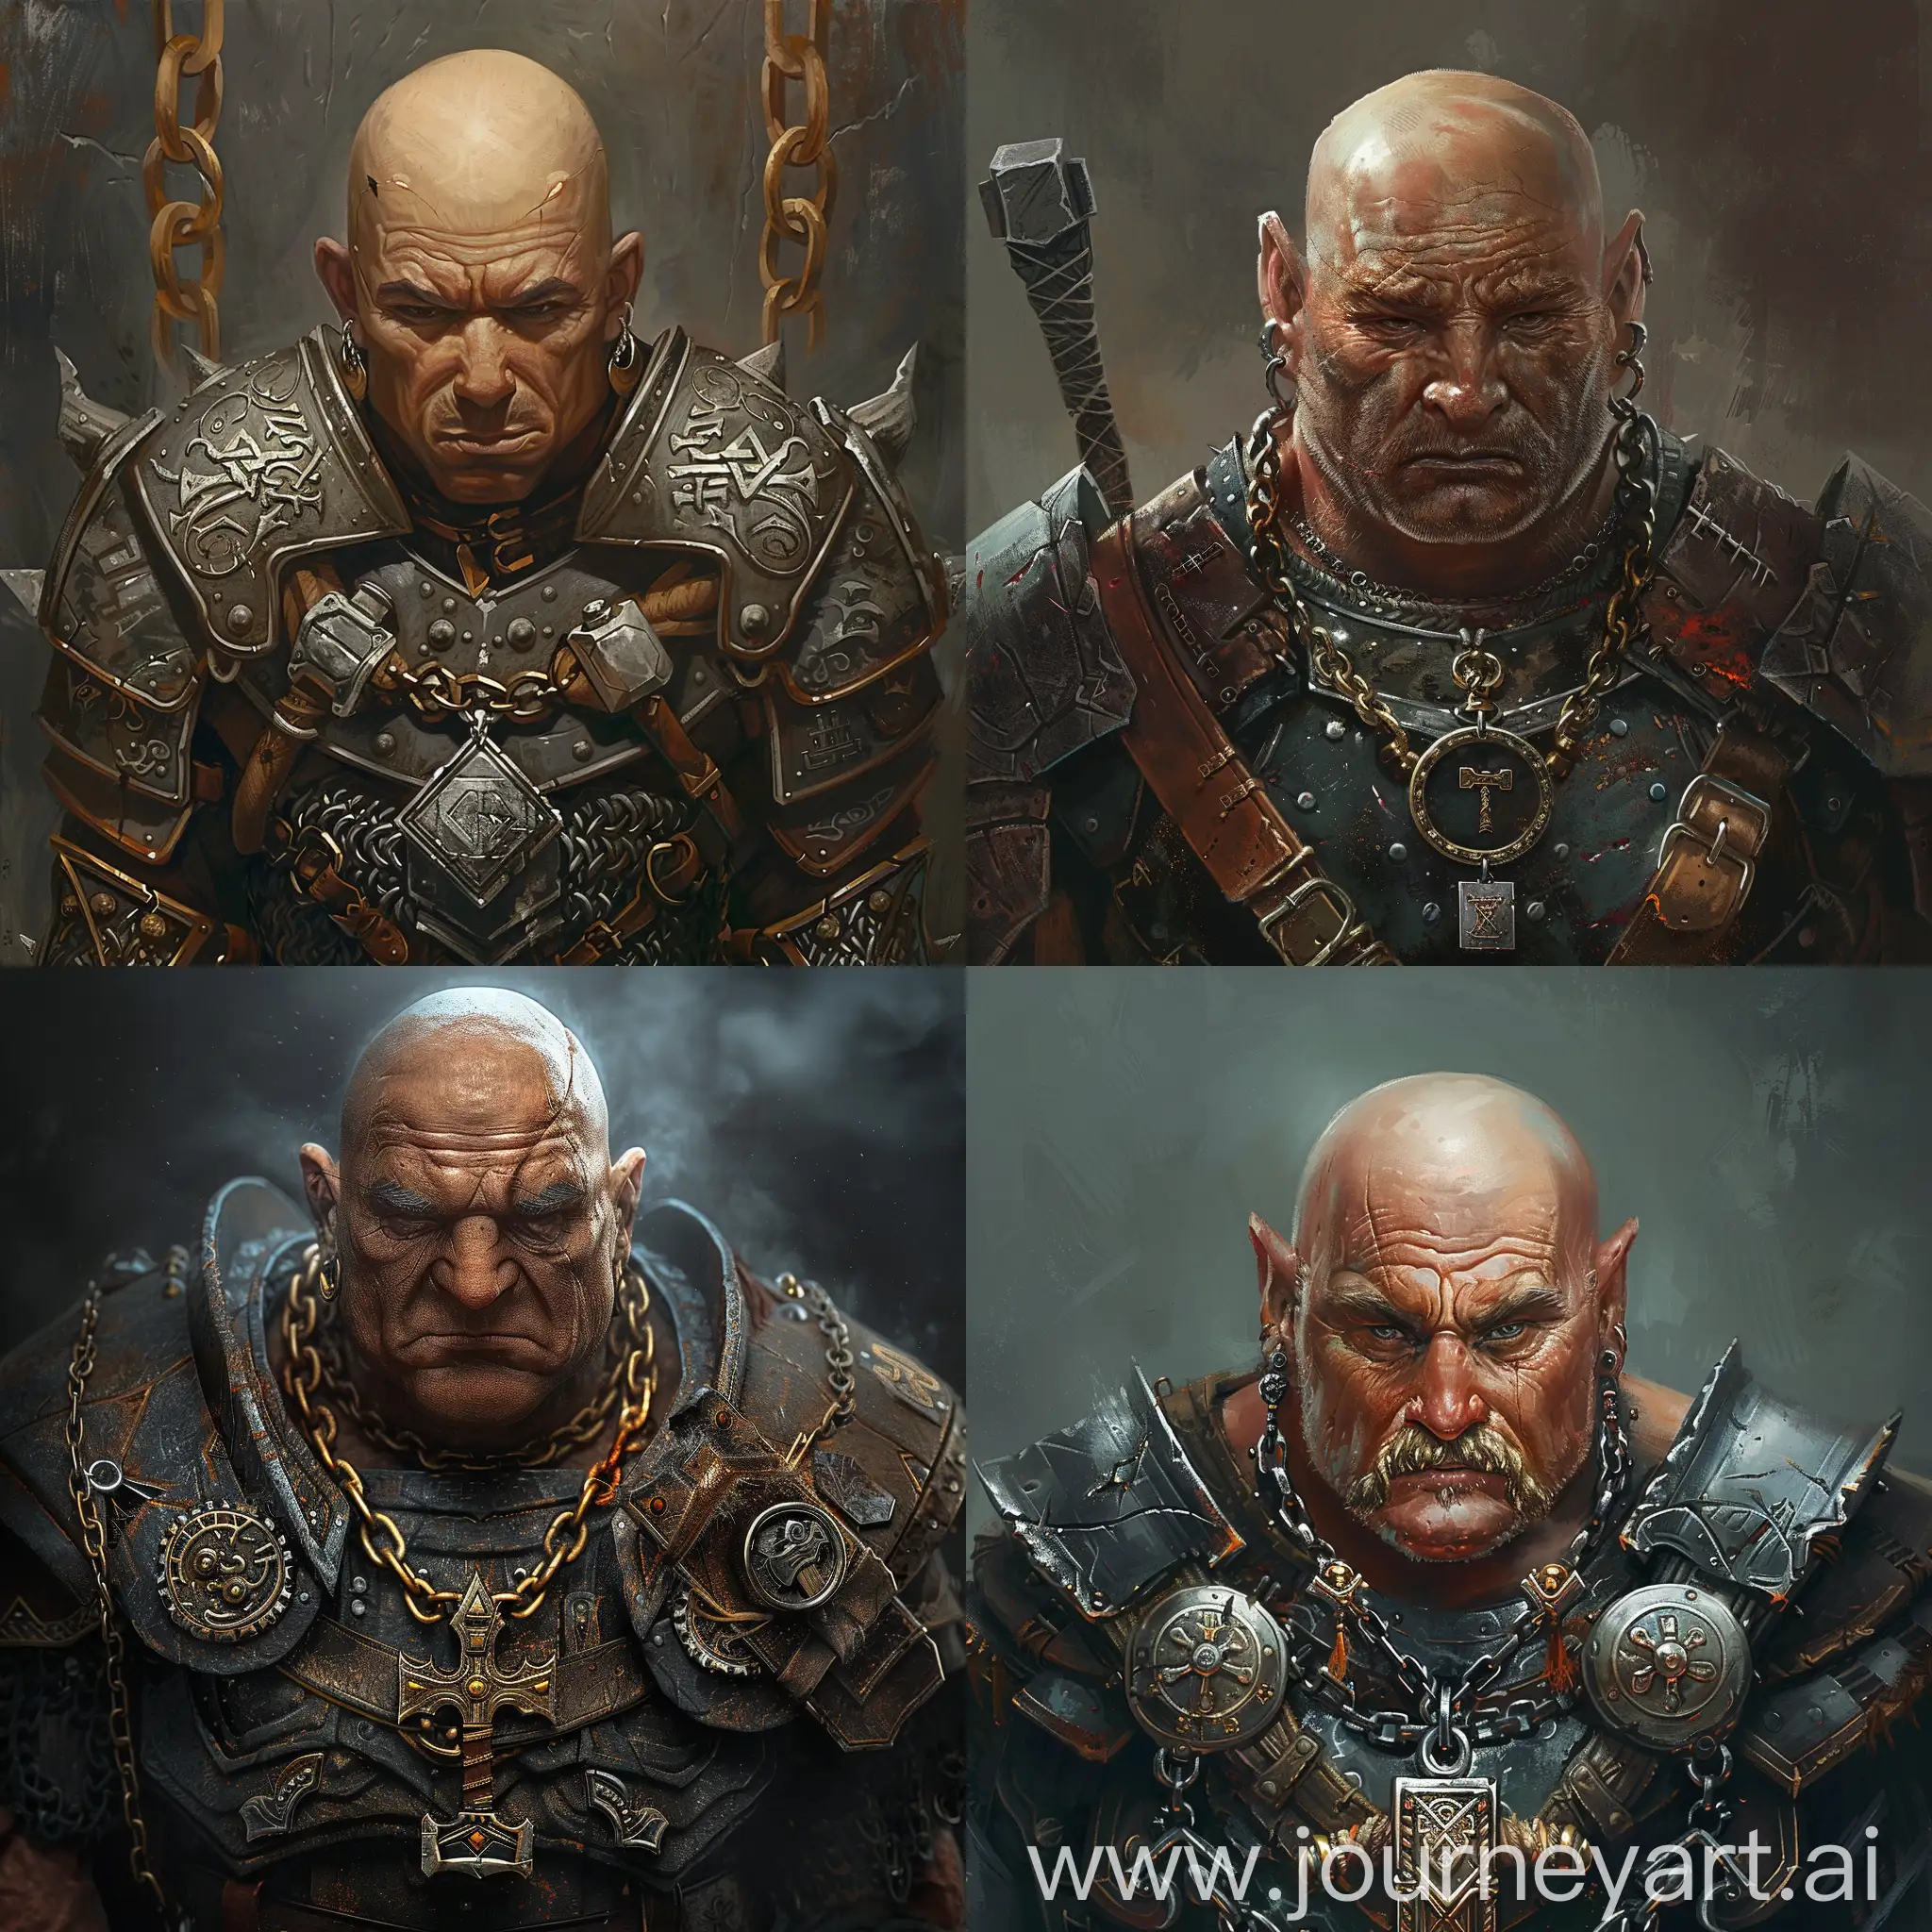 Mighty-Bald-Dwarf-in-Ornate-Armor-with-Hammer-Necklace